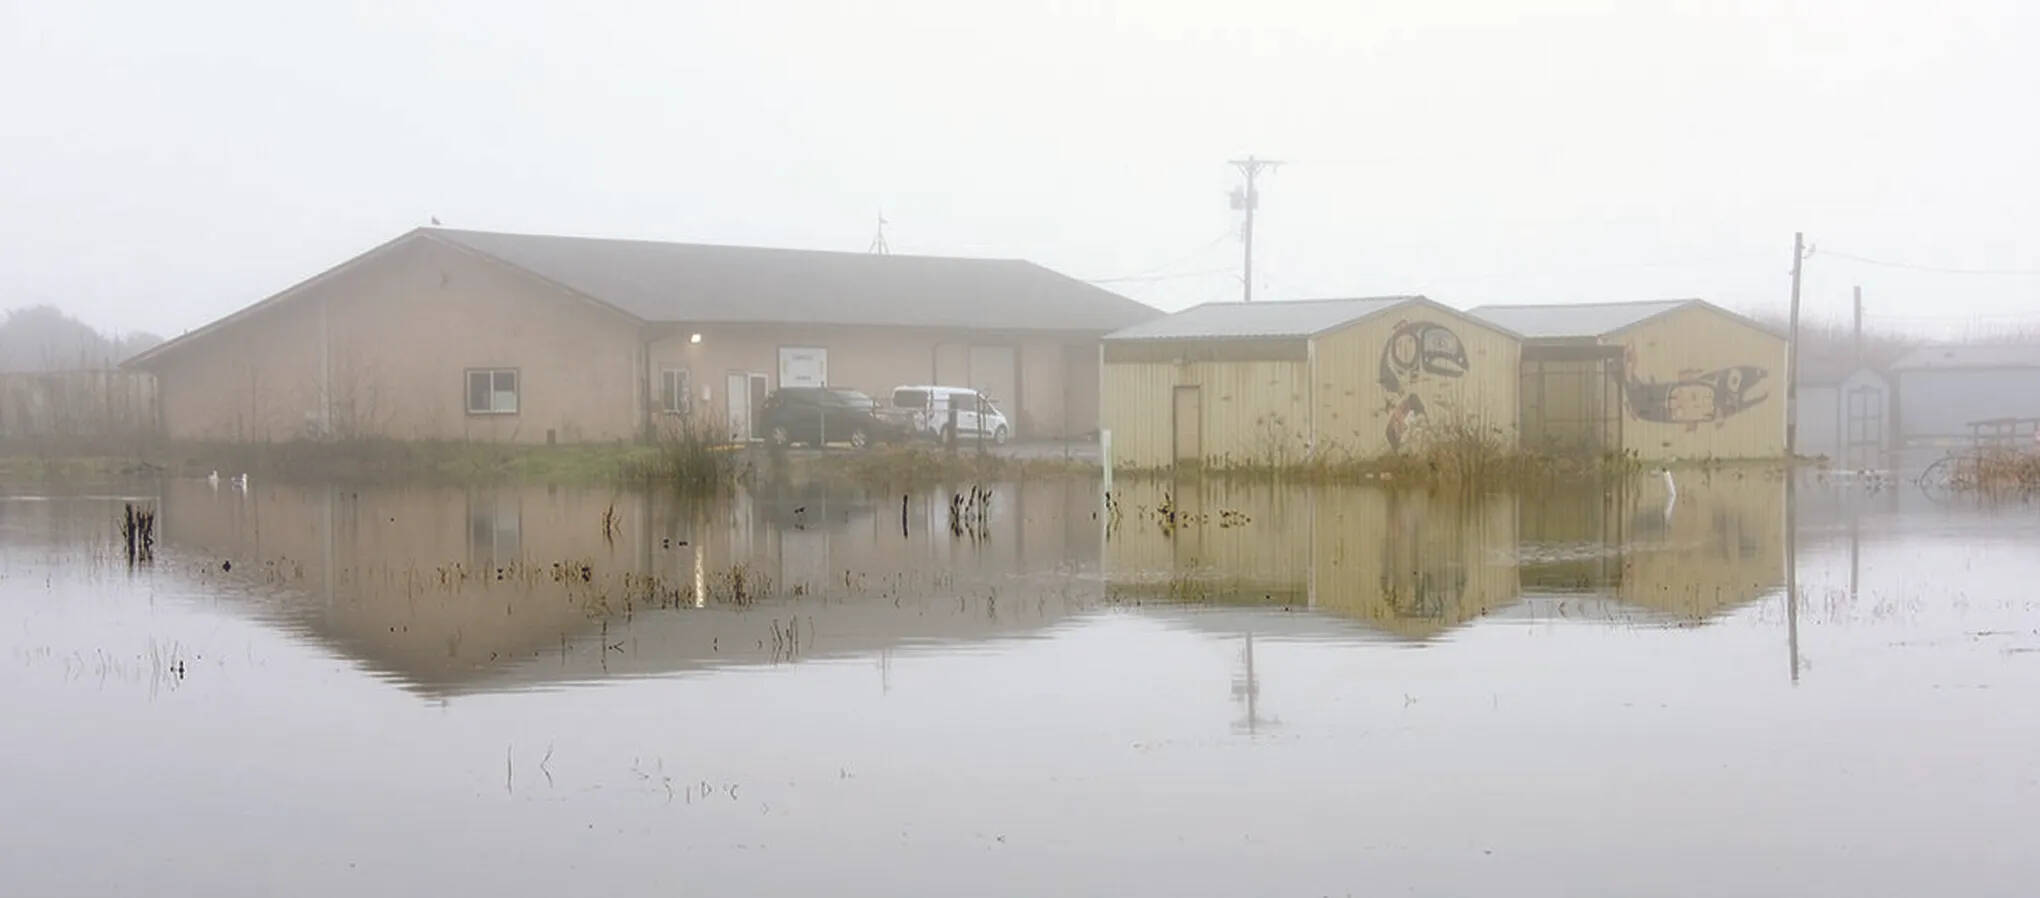 Larry Workman / Quinault Indian Nation 
The Quinault have always lived at the mouth of the river that bears their name but climate change has turned winter surf, rains and river flows into a menace that floods their lower village, such as in this winter flood in January 2021.